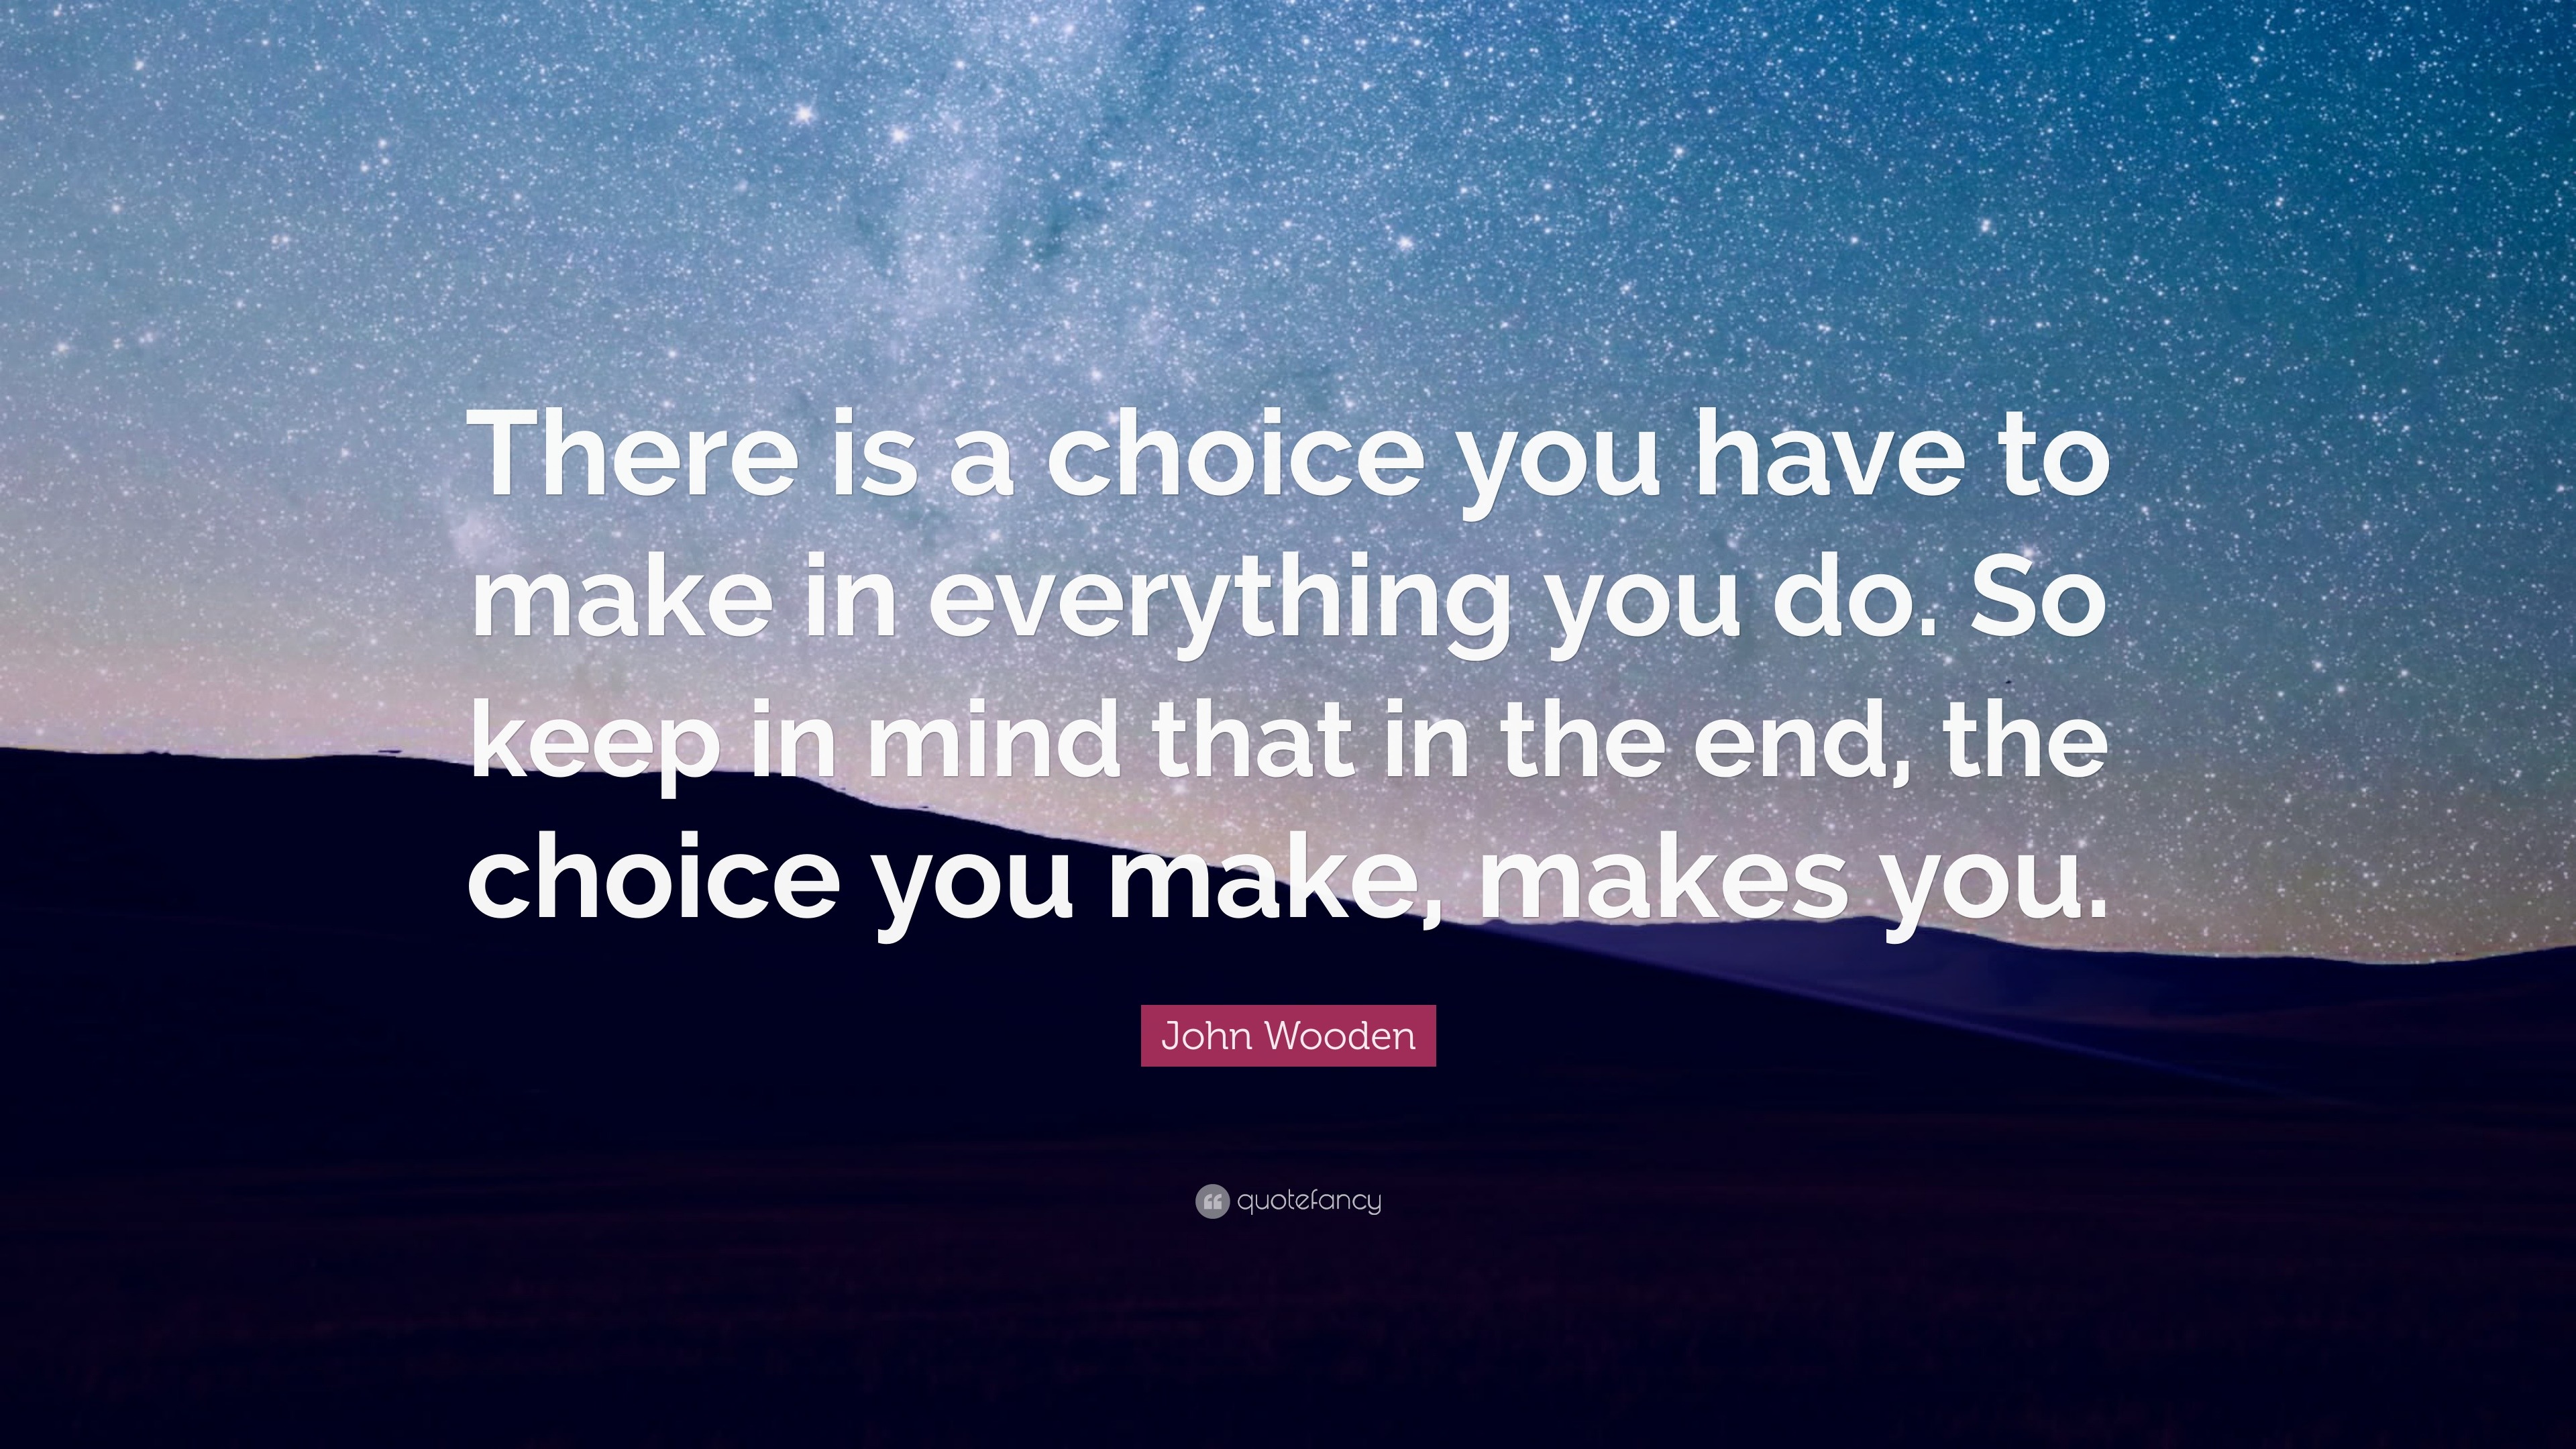 John Wooden Quote: “There is a choice you have to make in everything